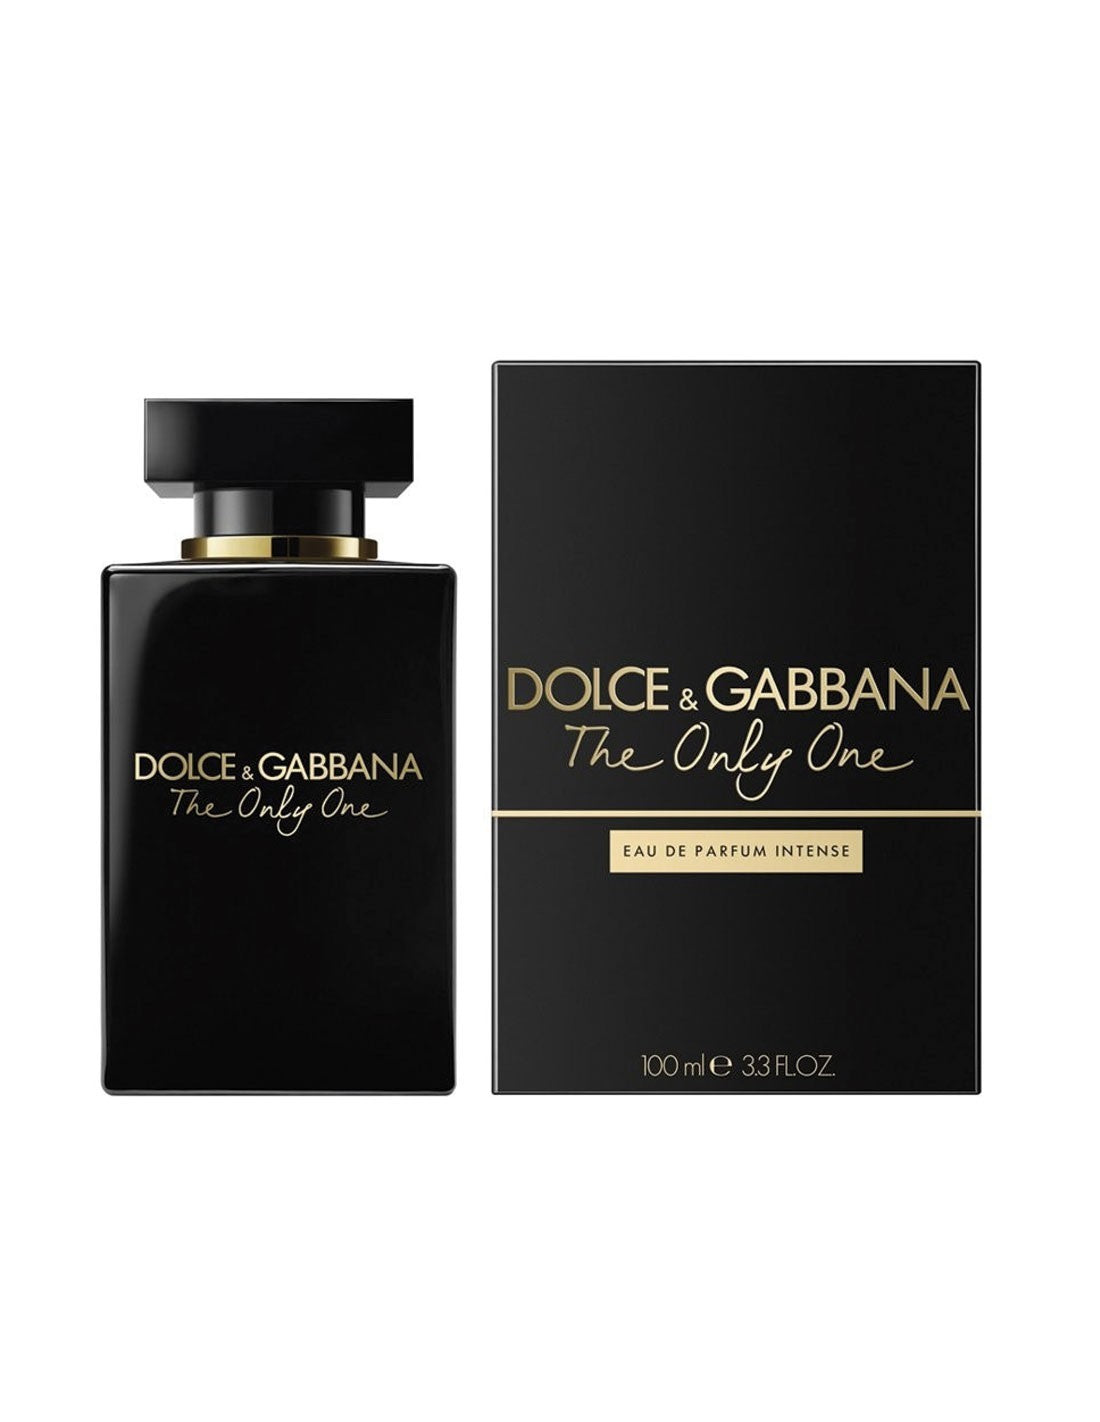 Dolce y Gabbana D yg a The Only One Fem 3 Ep Int 100v